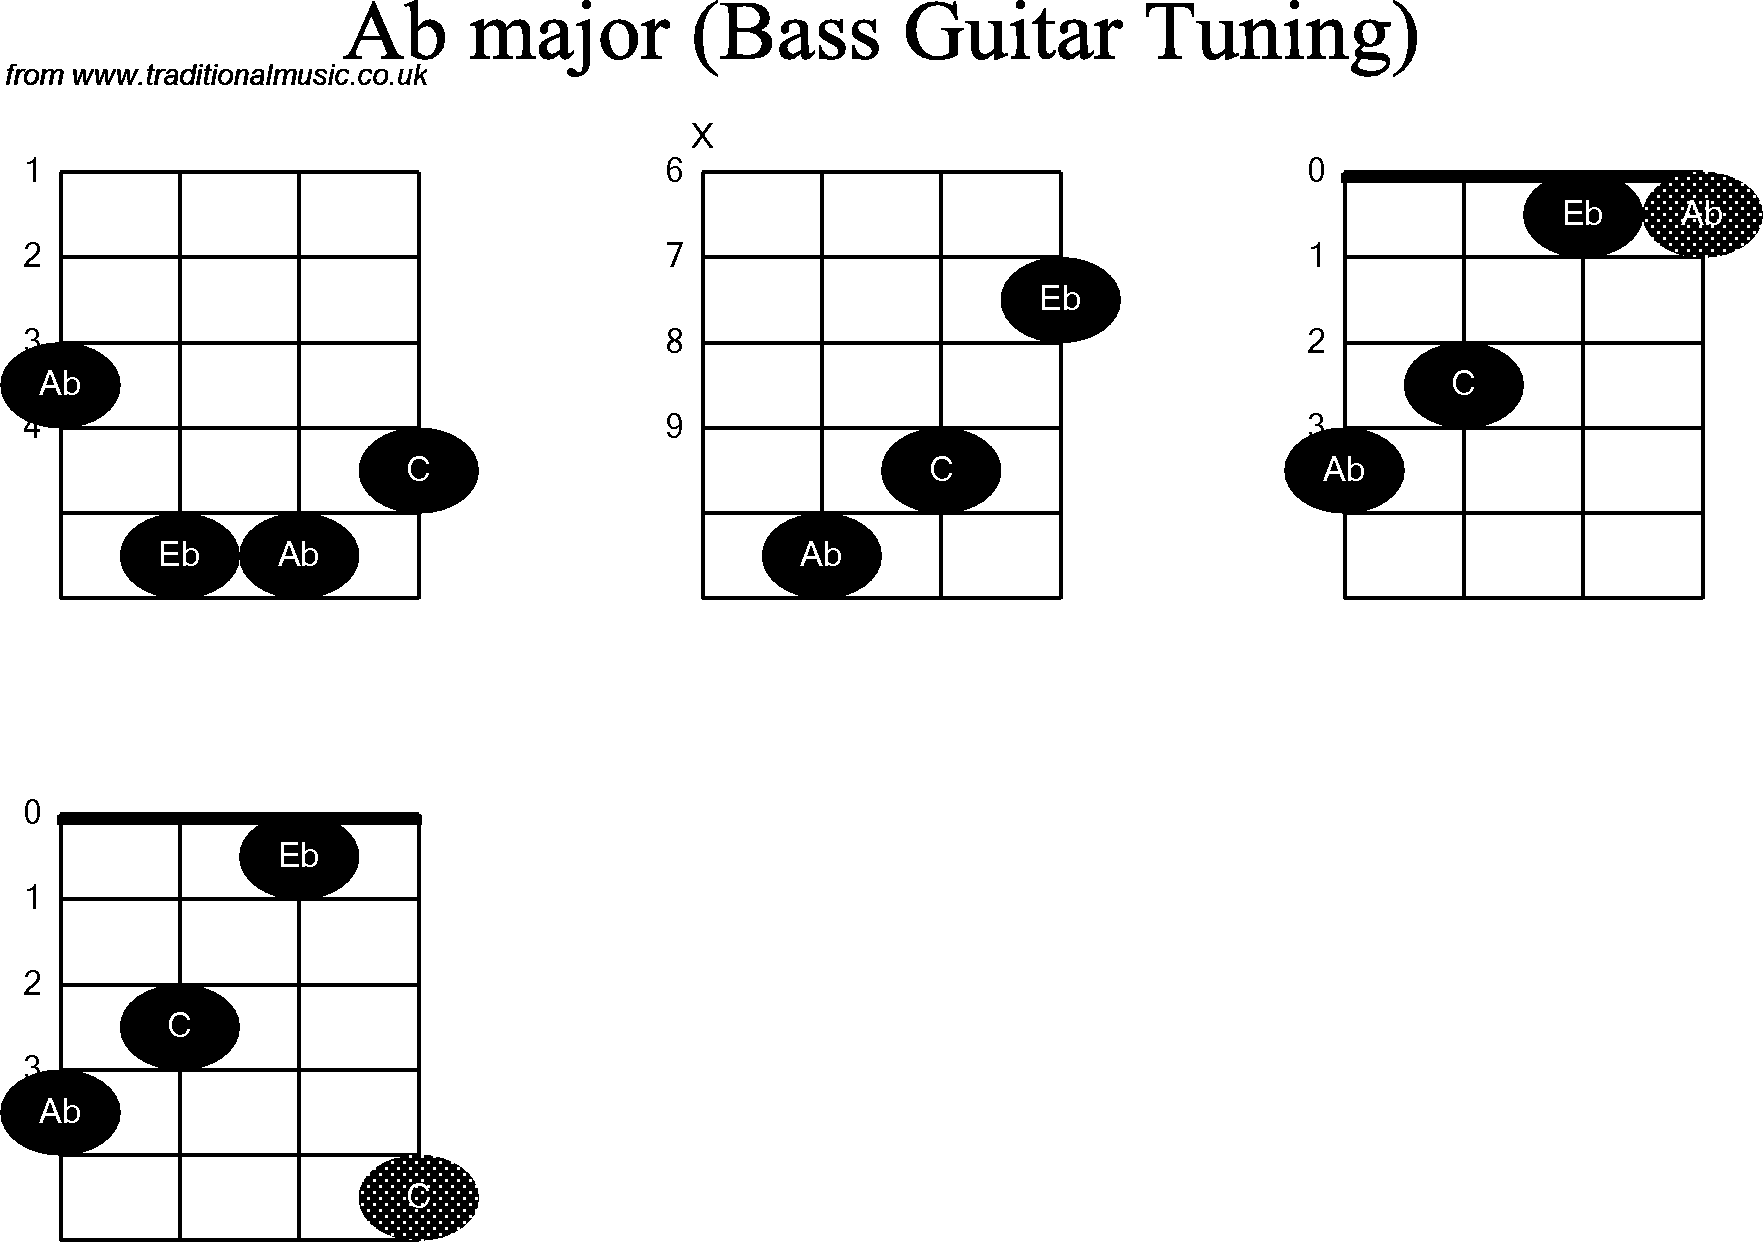 Bass Guitar chord charts for: Ab